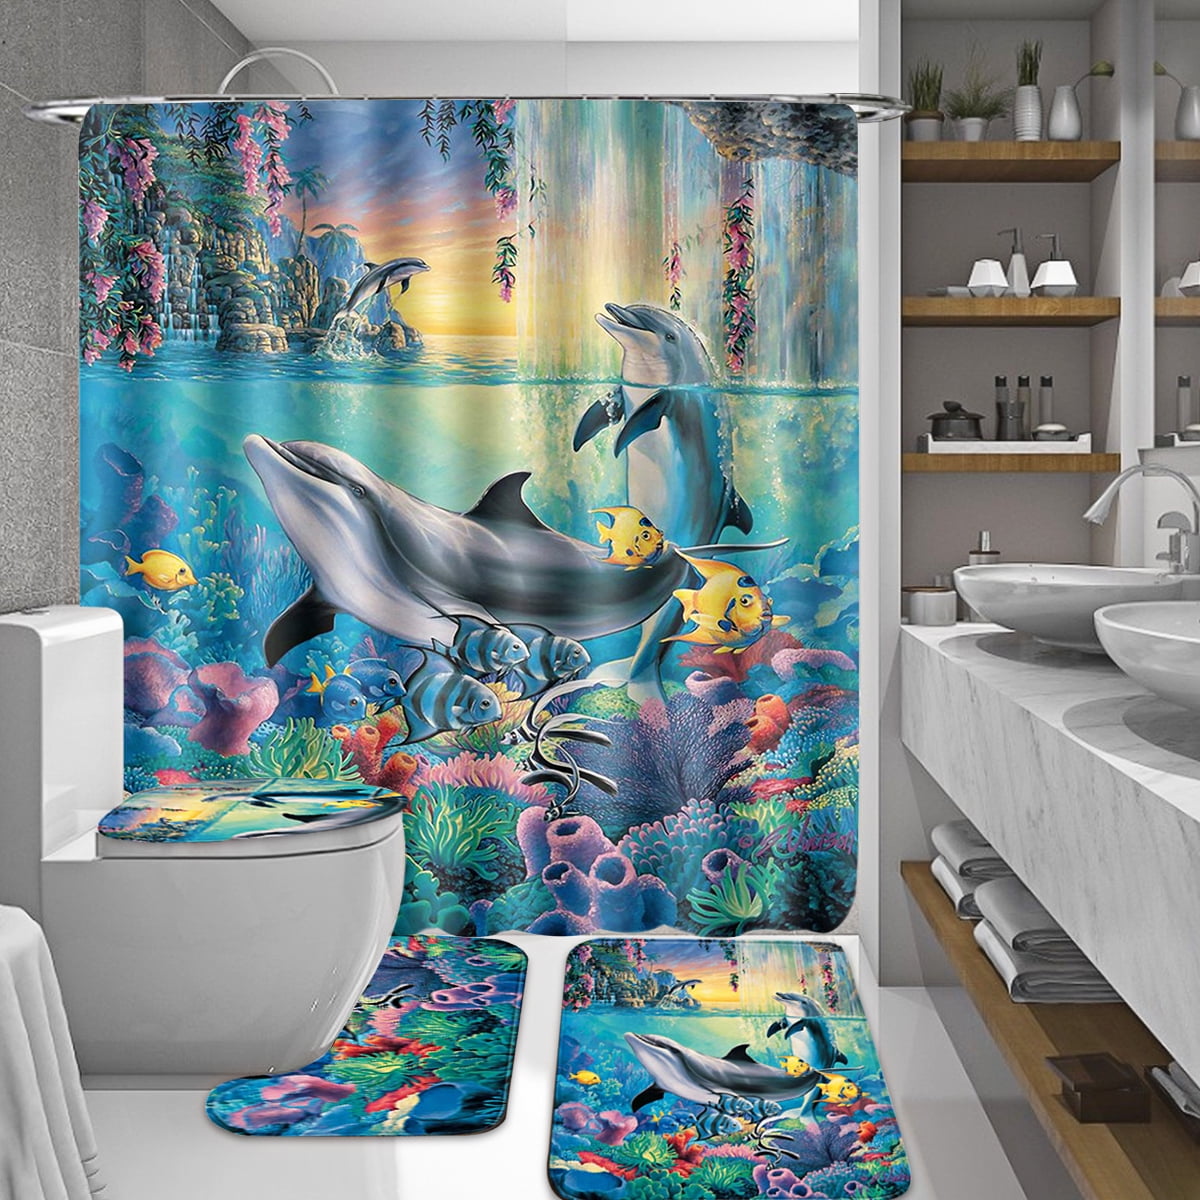 Bathroom Waterproof Fabric Shower Curtain Set Underwater Four Dolphins Swimming 